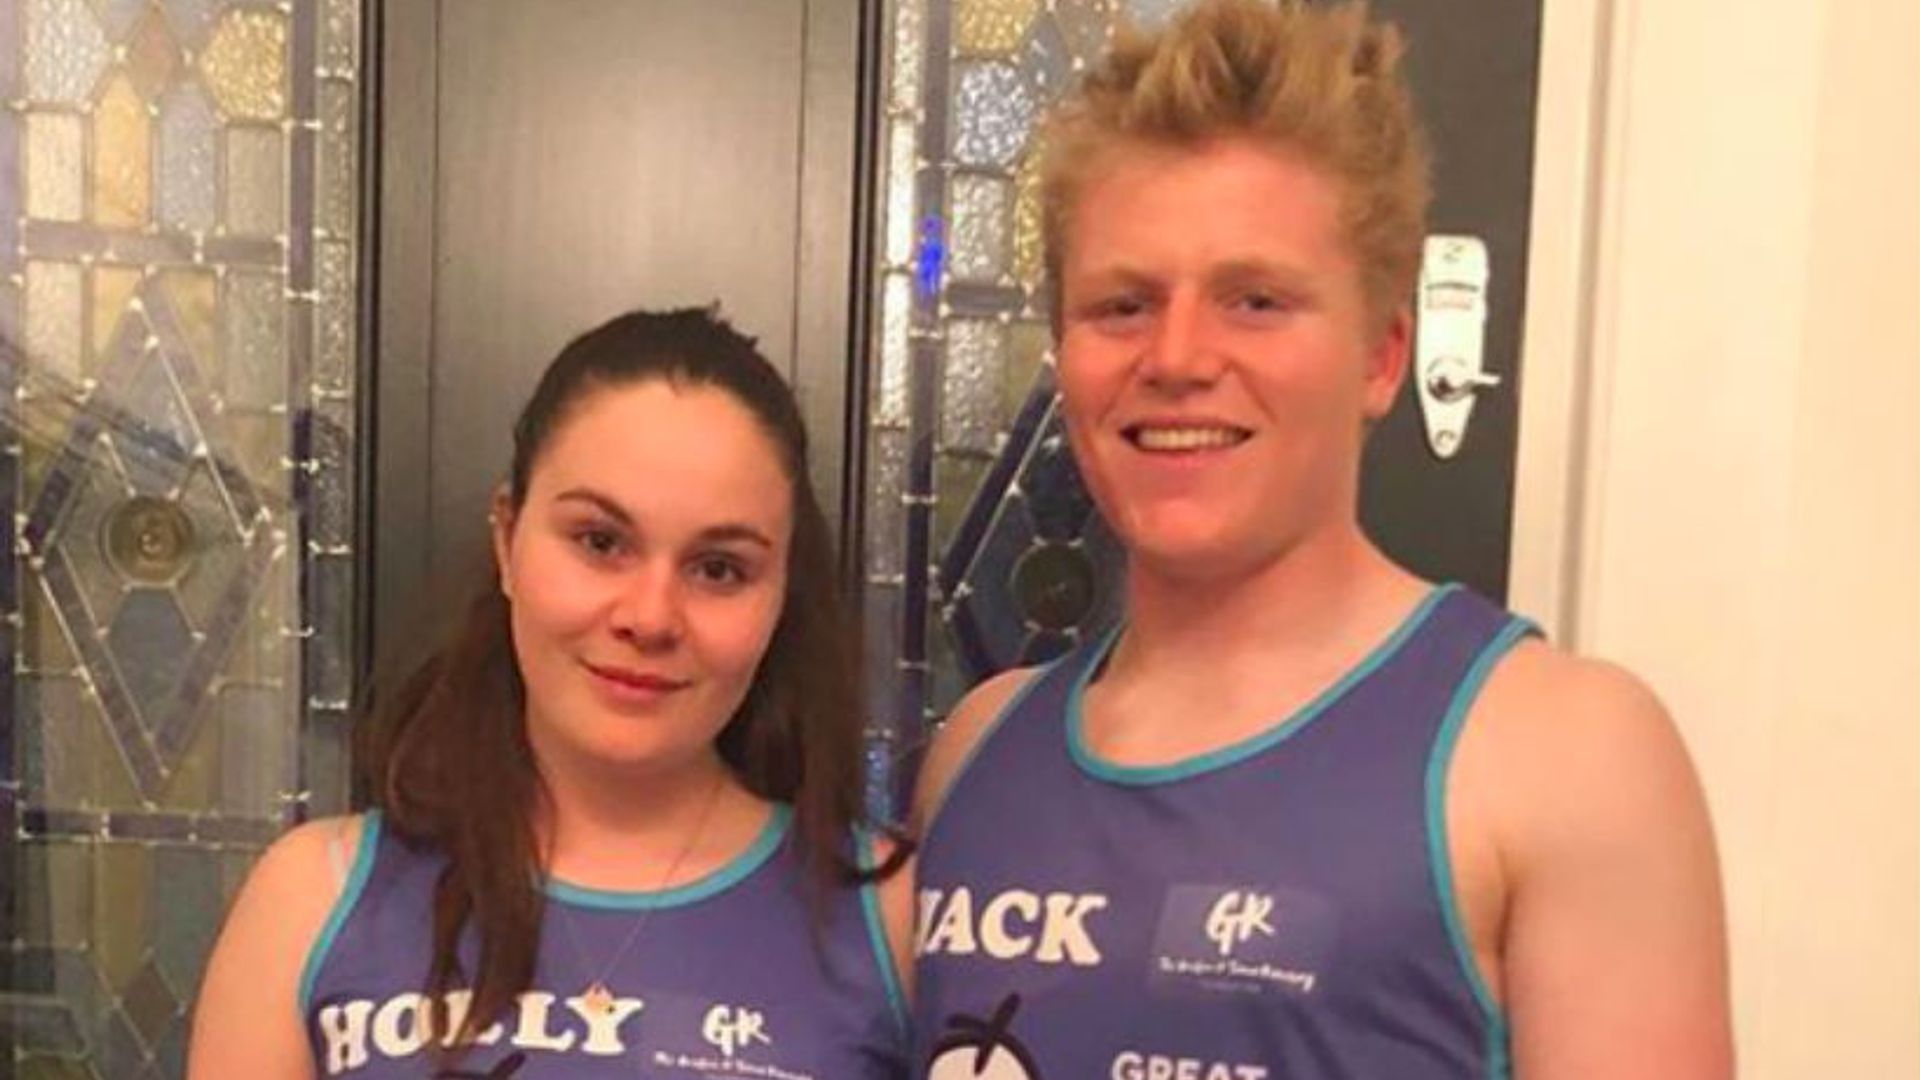 Gordon Ramsay's twins Holly and Jack, 18, run the London Marathon in memory of late brother Rocky